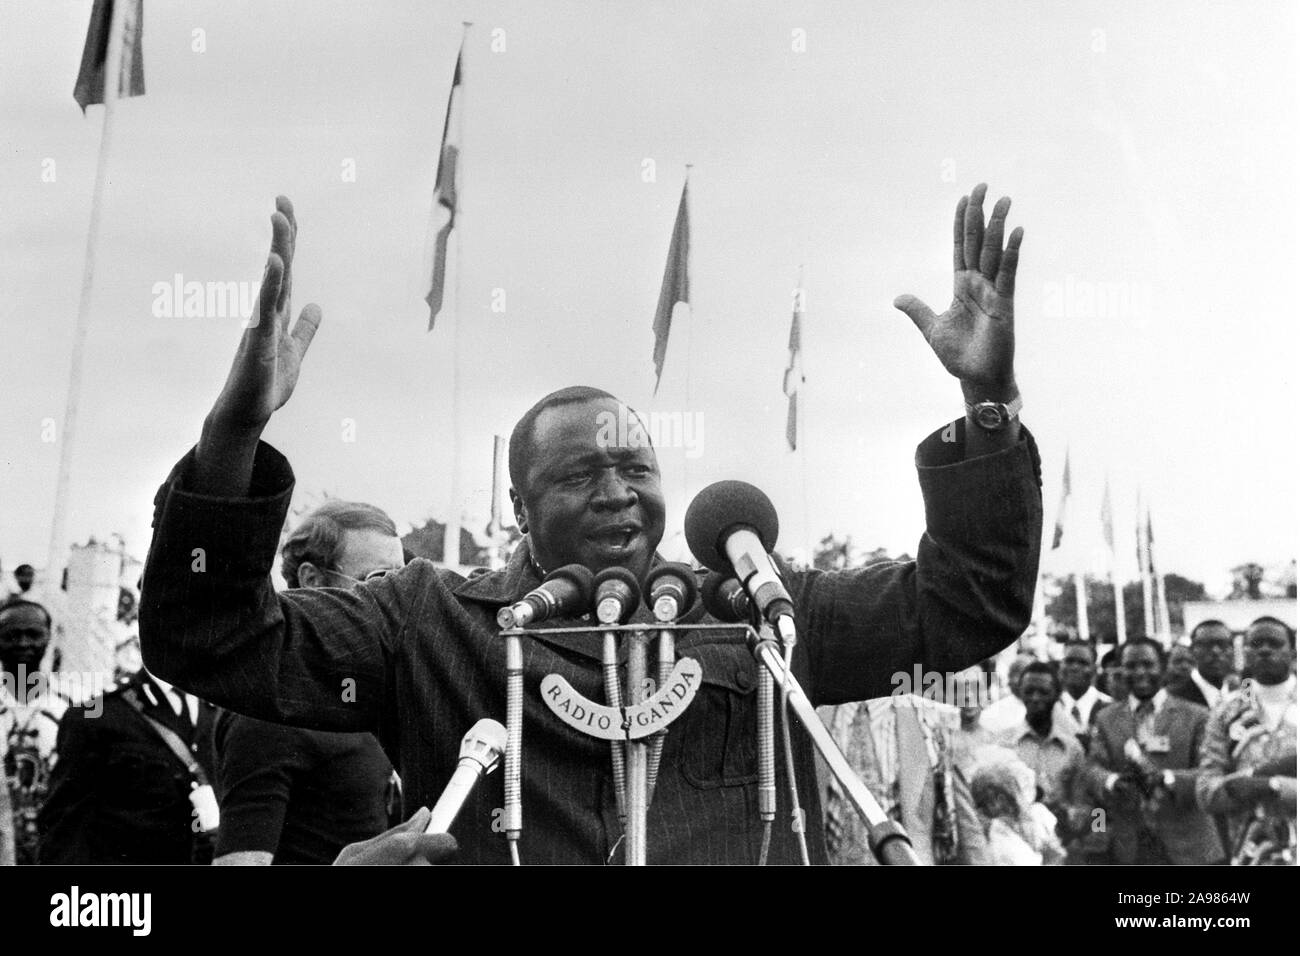 President of Uganda Idi Amin Dada (C) gestures while addressing the media on July 28, 1975 in Kampala during the Organization of African Unity (OUA) summit. Idi Amin's reign of terror lasted from 1971 when he seized power from Milton Obote, to 13 April 1979, when Tanzanian troops and exiled Ugandans stormed Kampala and removed him from power. The self-styled field marshal settled then in exile in Saudi Arabia. Throughout his presidency there were continual reports of widespread atrocities. Stock Photo